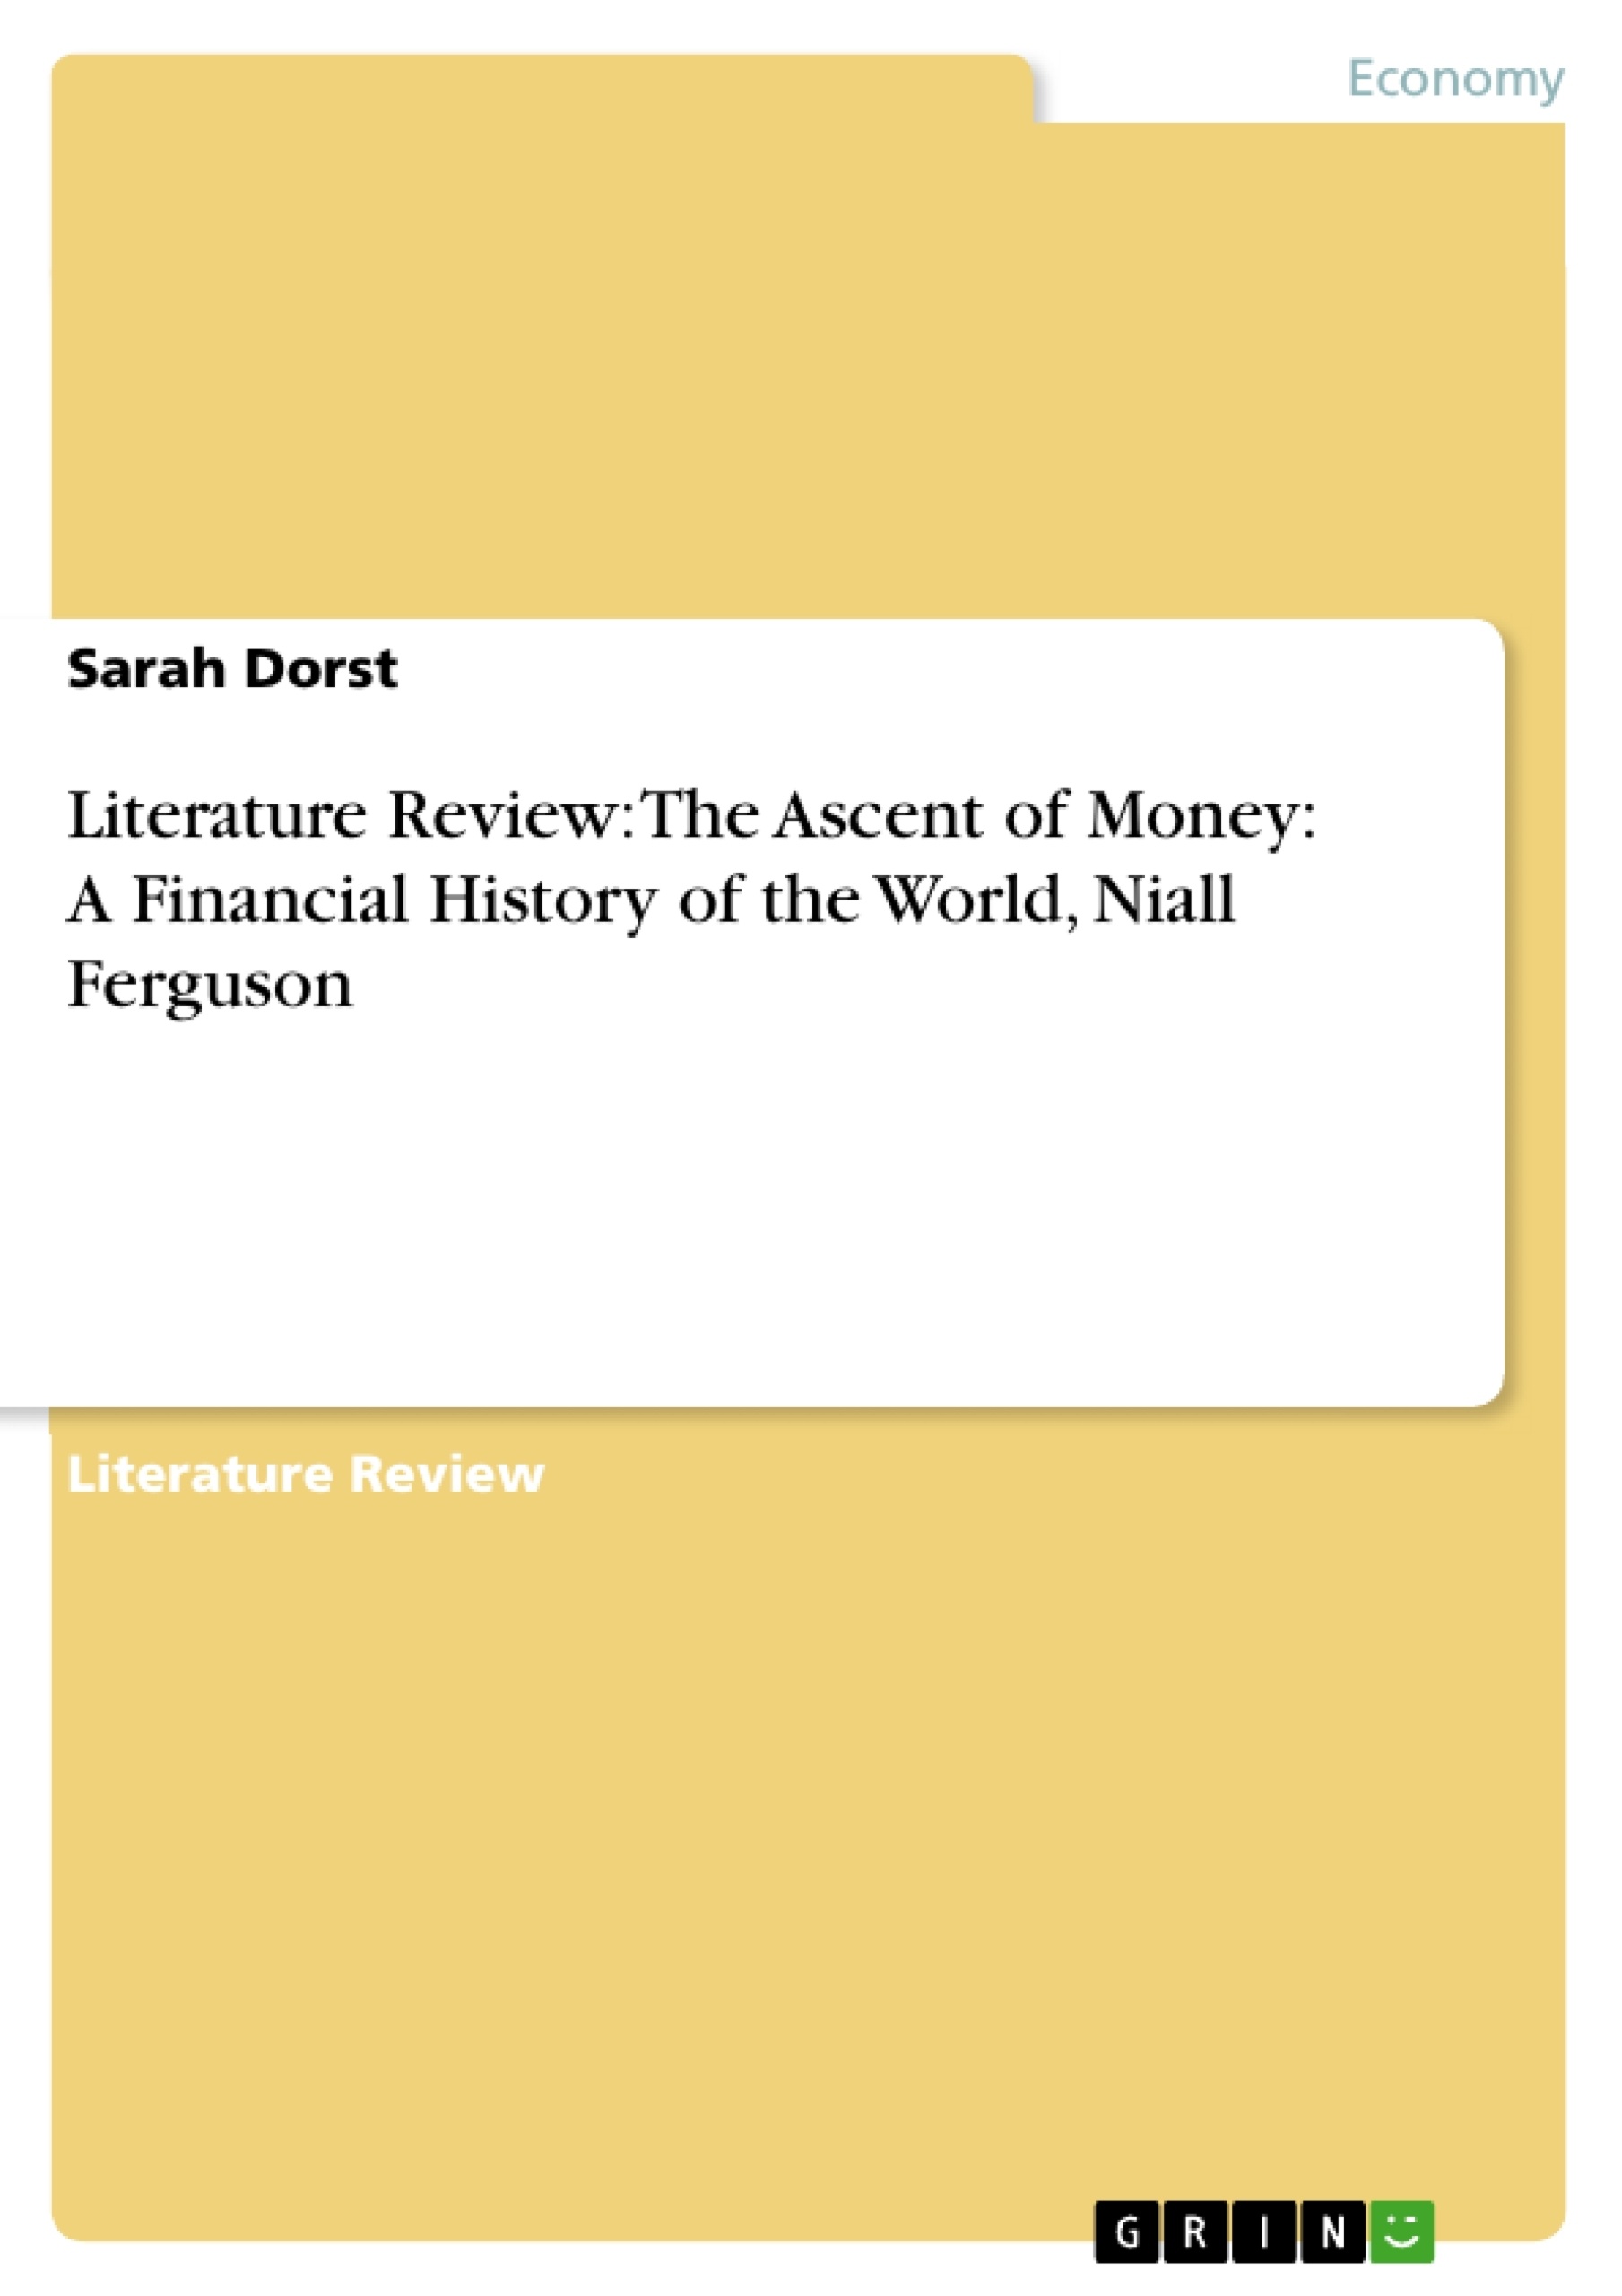 Titel: Literature Review: The Ascent of Money: A Financial History of the World, Niall Ferguson